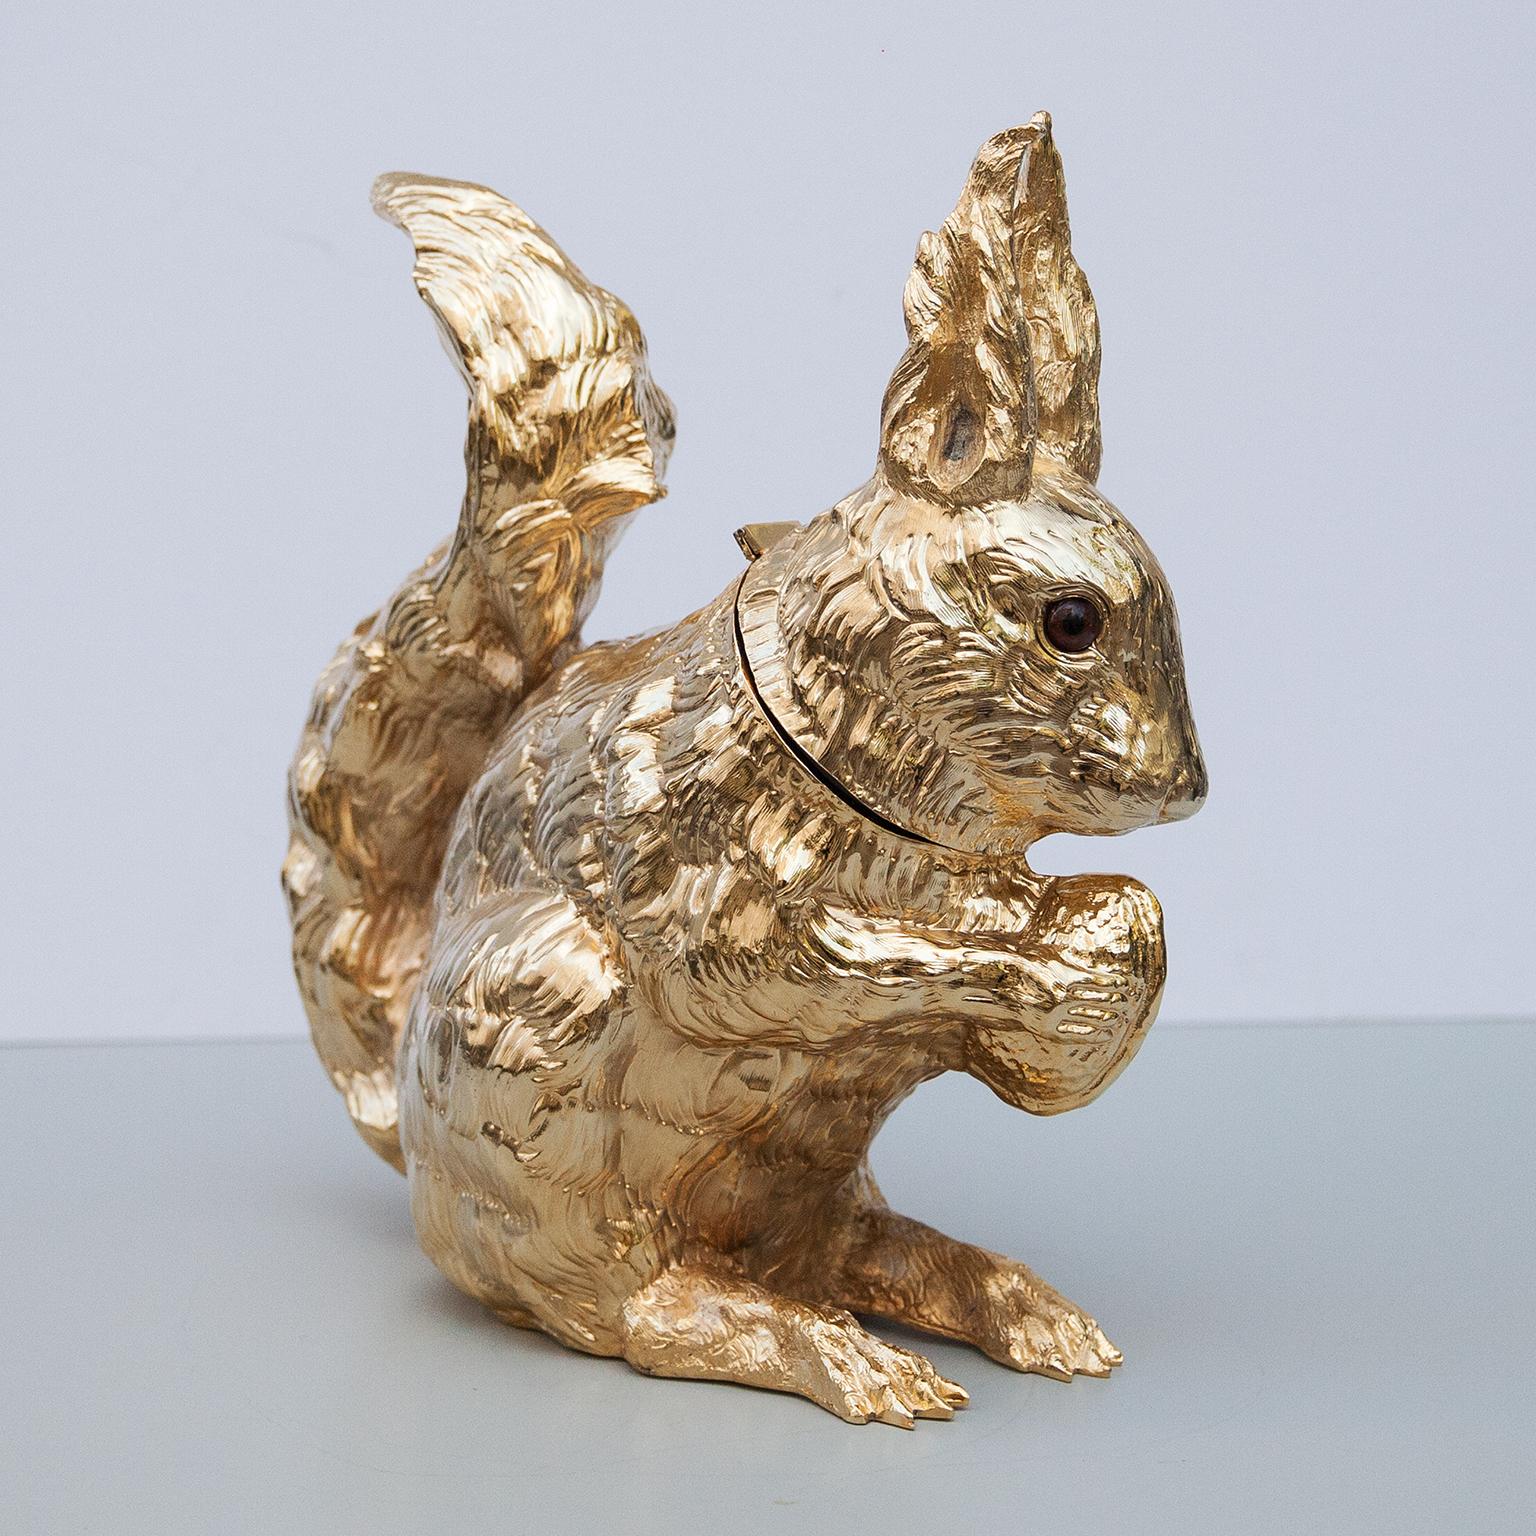 Franco Lapinis exquisite vintage life size squirrel sculpture wine cooler or ice cooler is made entirely of gold plated and its surface is lightly textured to give it an organic feel, new plastic inlay inside. Either alone or combined with other